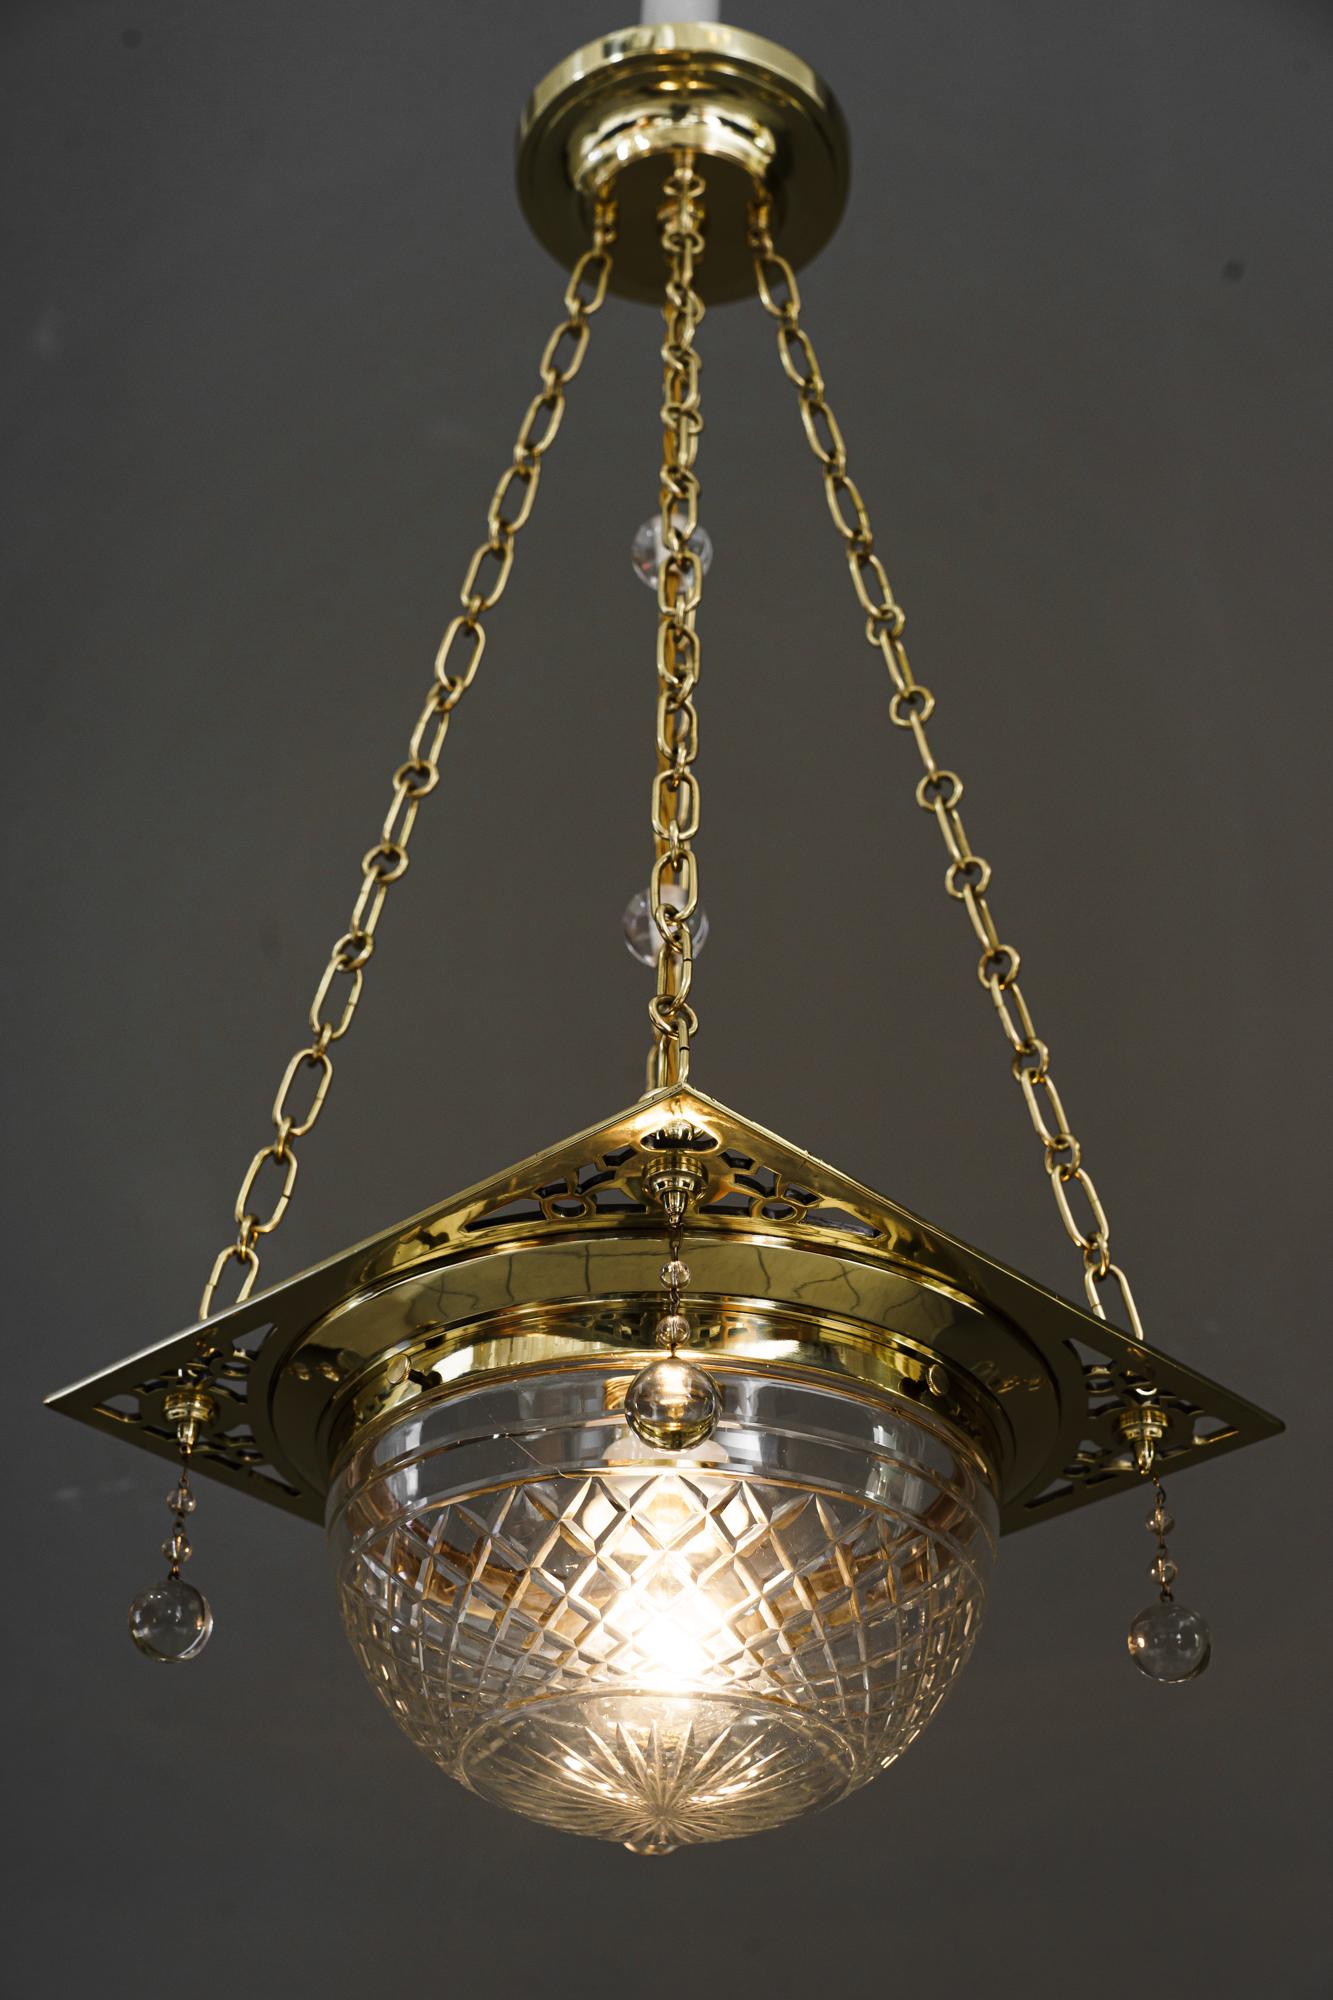 Art Deco Pendant with cut glass shade around 1920s
Brass polished and stove enamelled
Original cut glass shade.